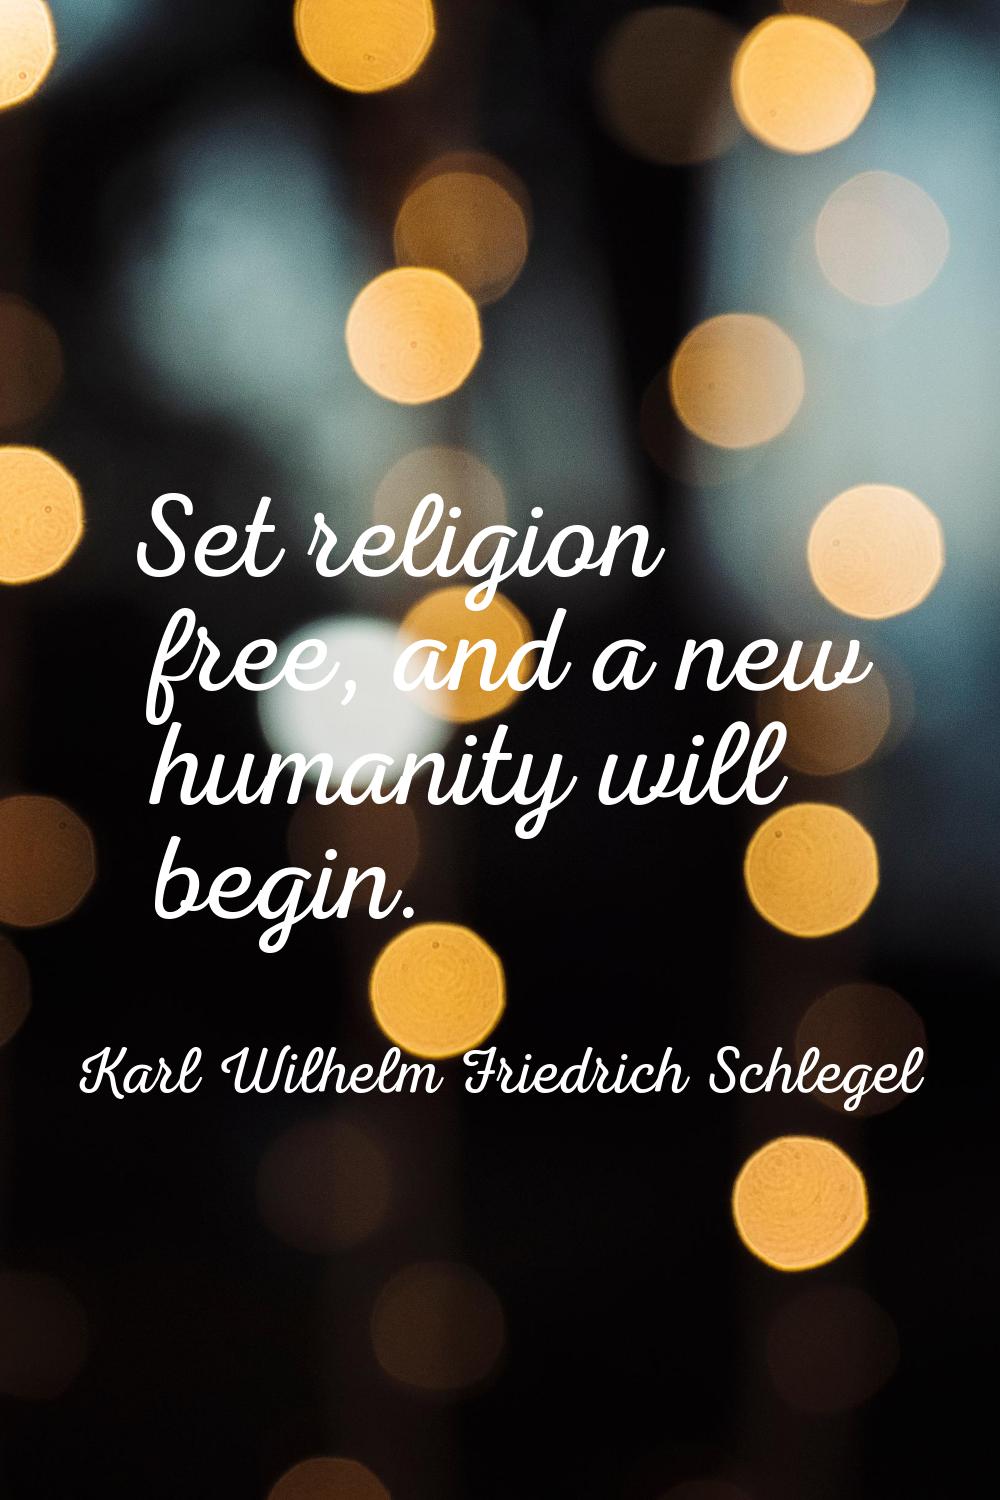 Set religion free, and a new humanity will begin.